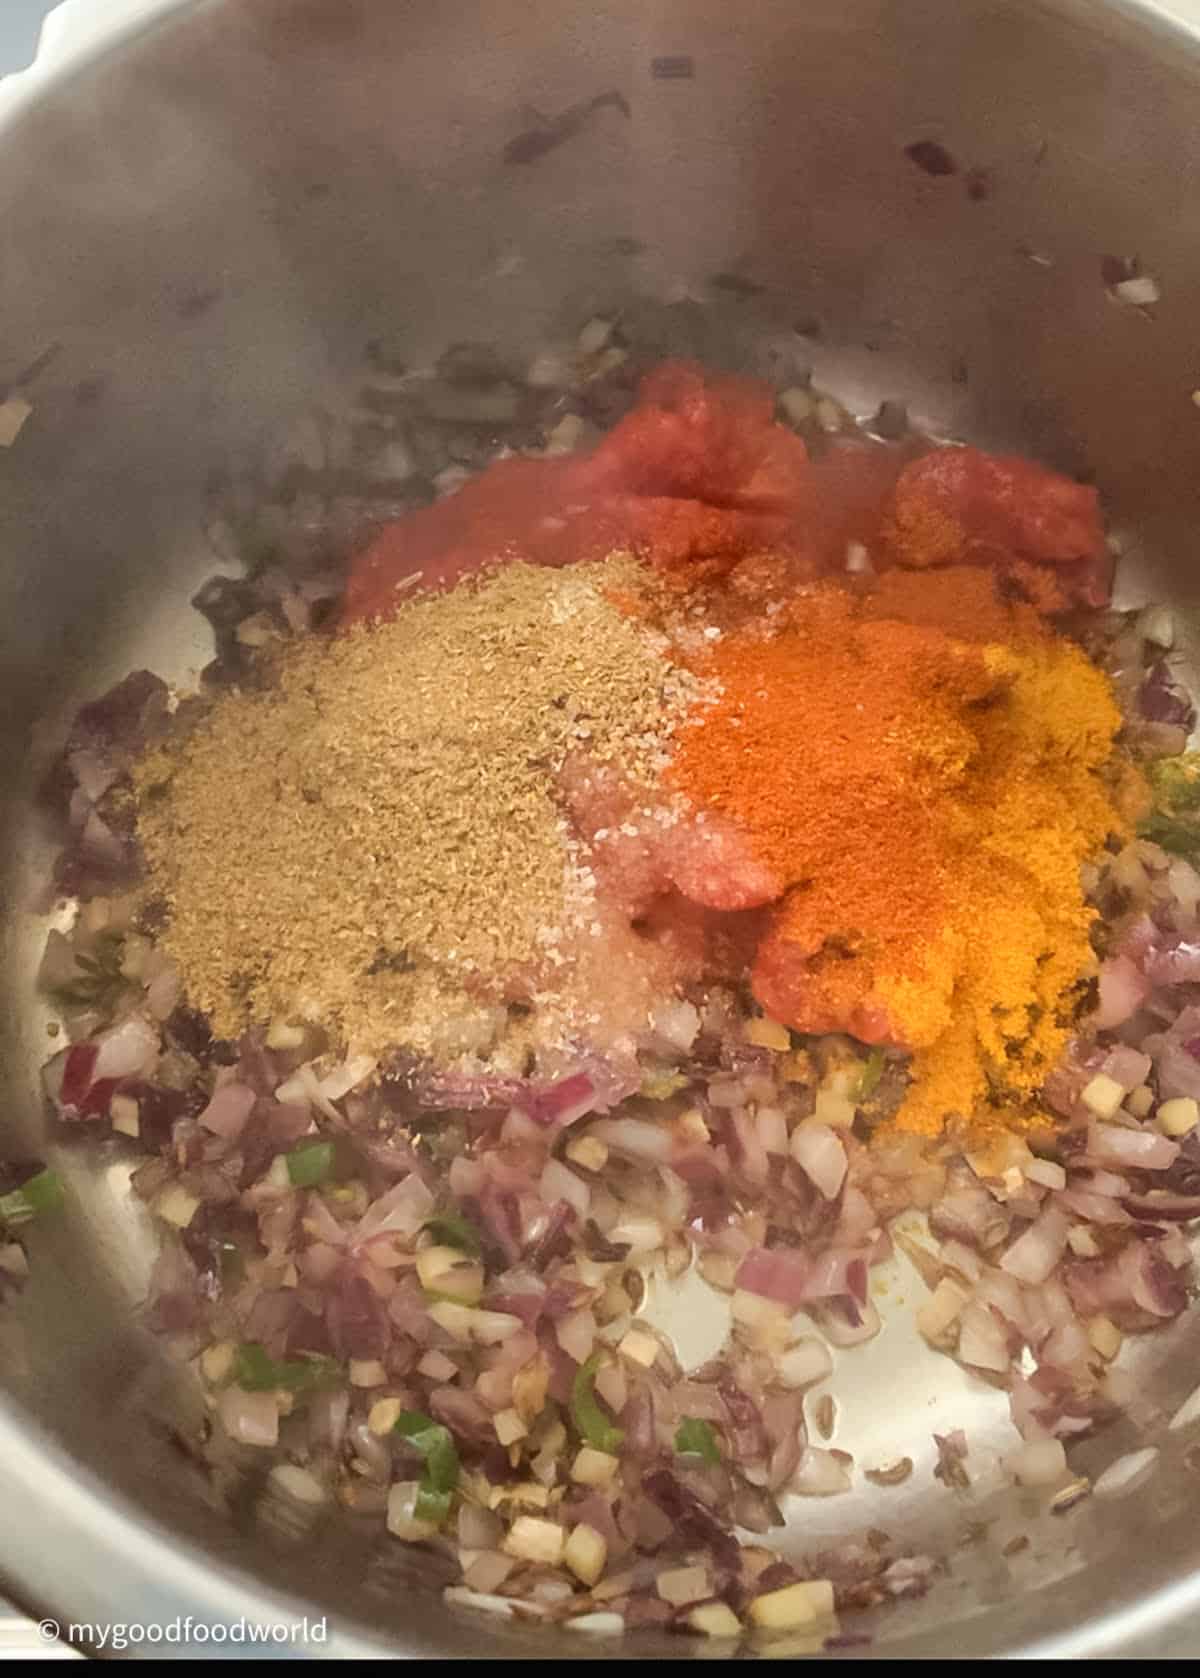 Chana dal fry recipe is being made with some spice powders and aromatics that are frying in a steel pot.